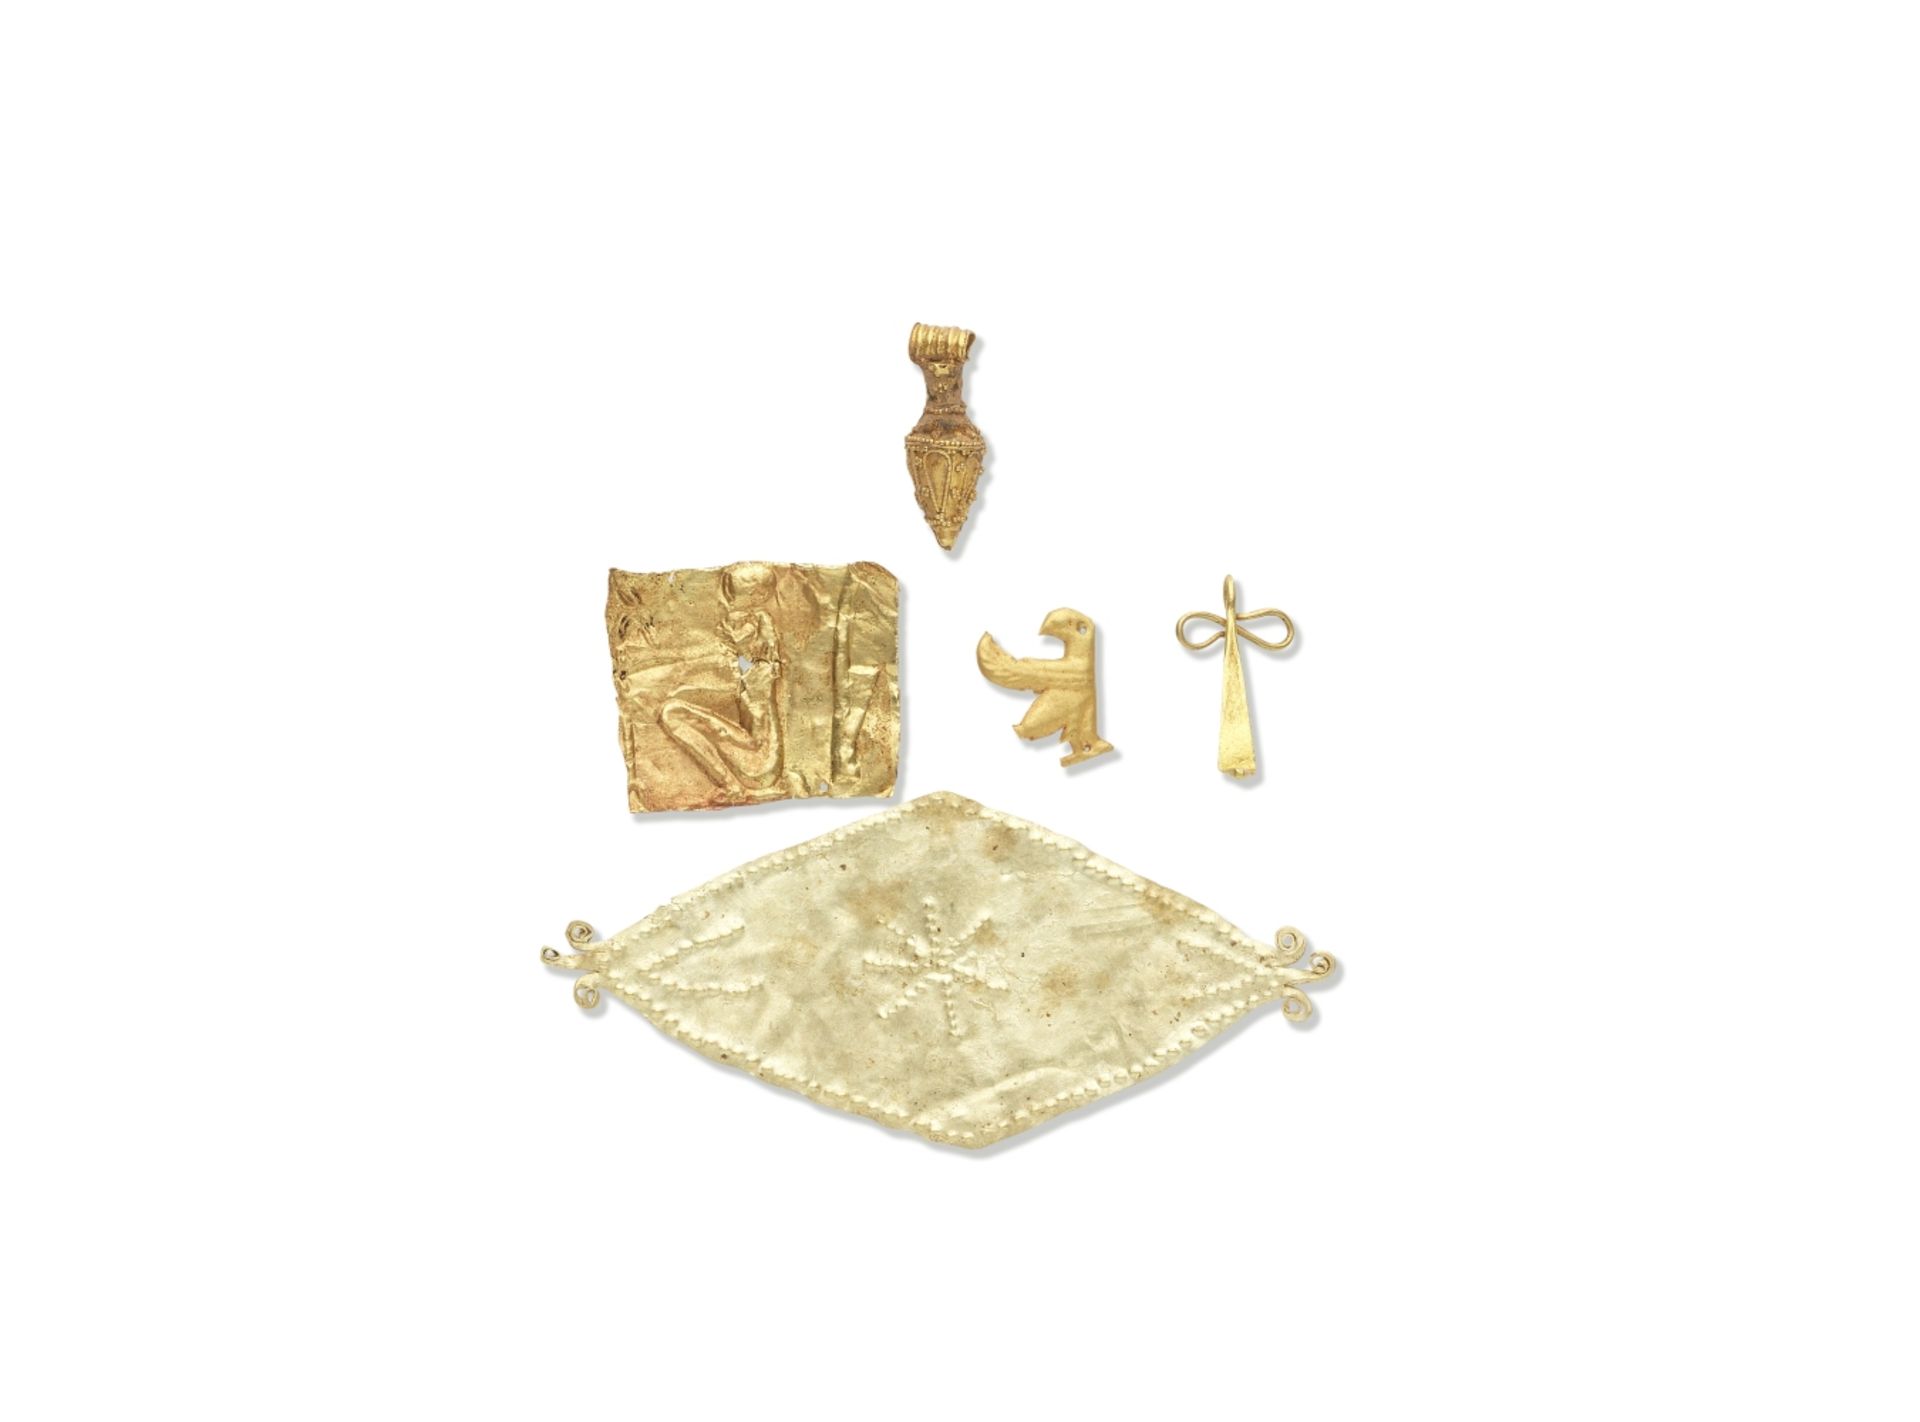 Five Egyptian and Greek gold jewellery elements 5